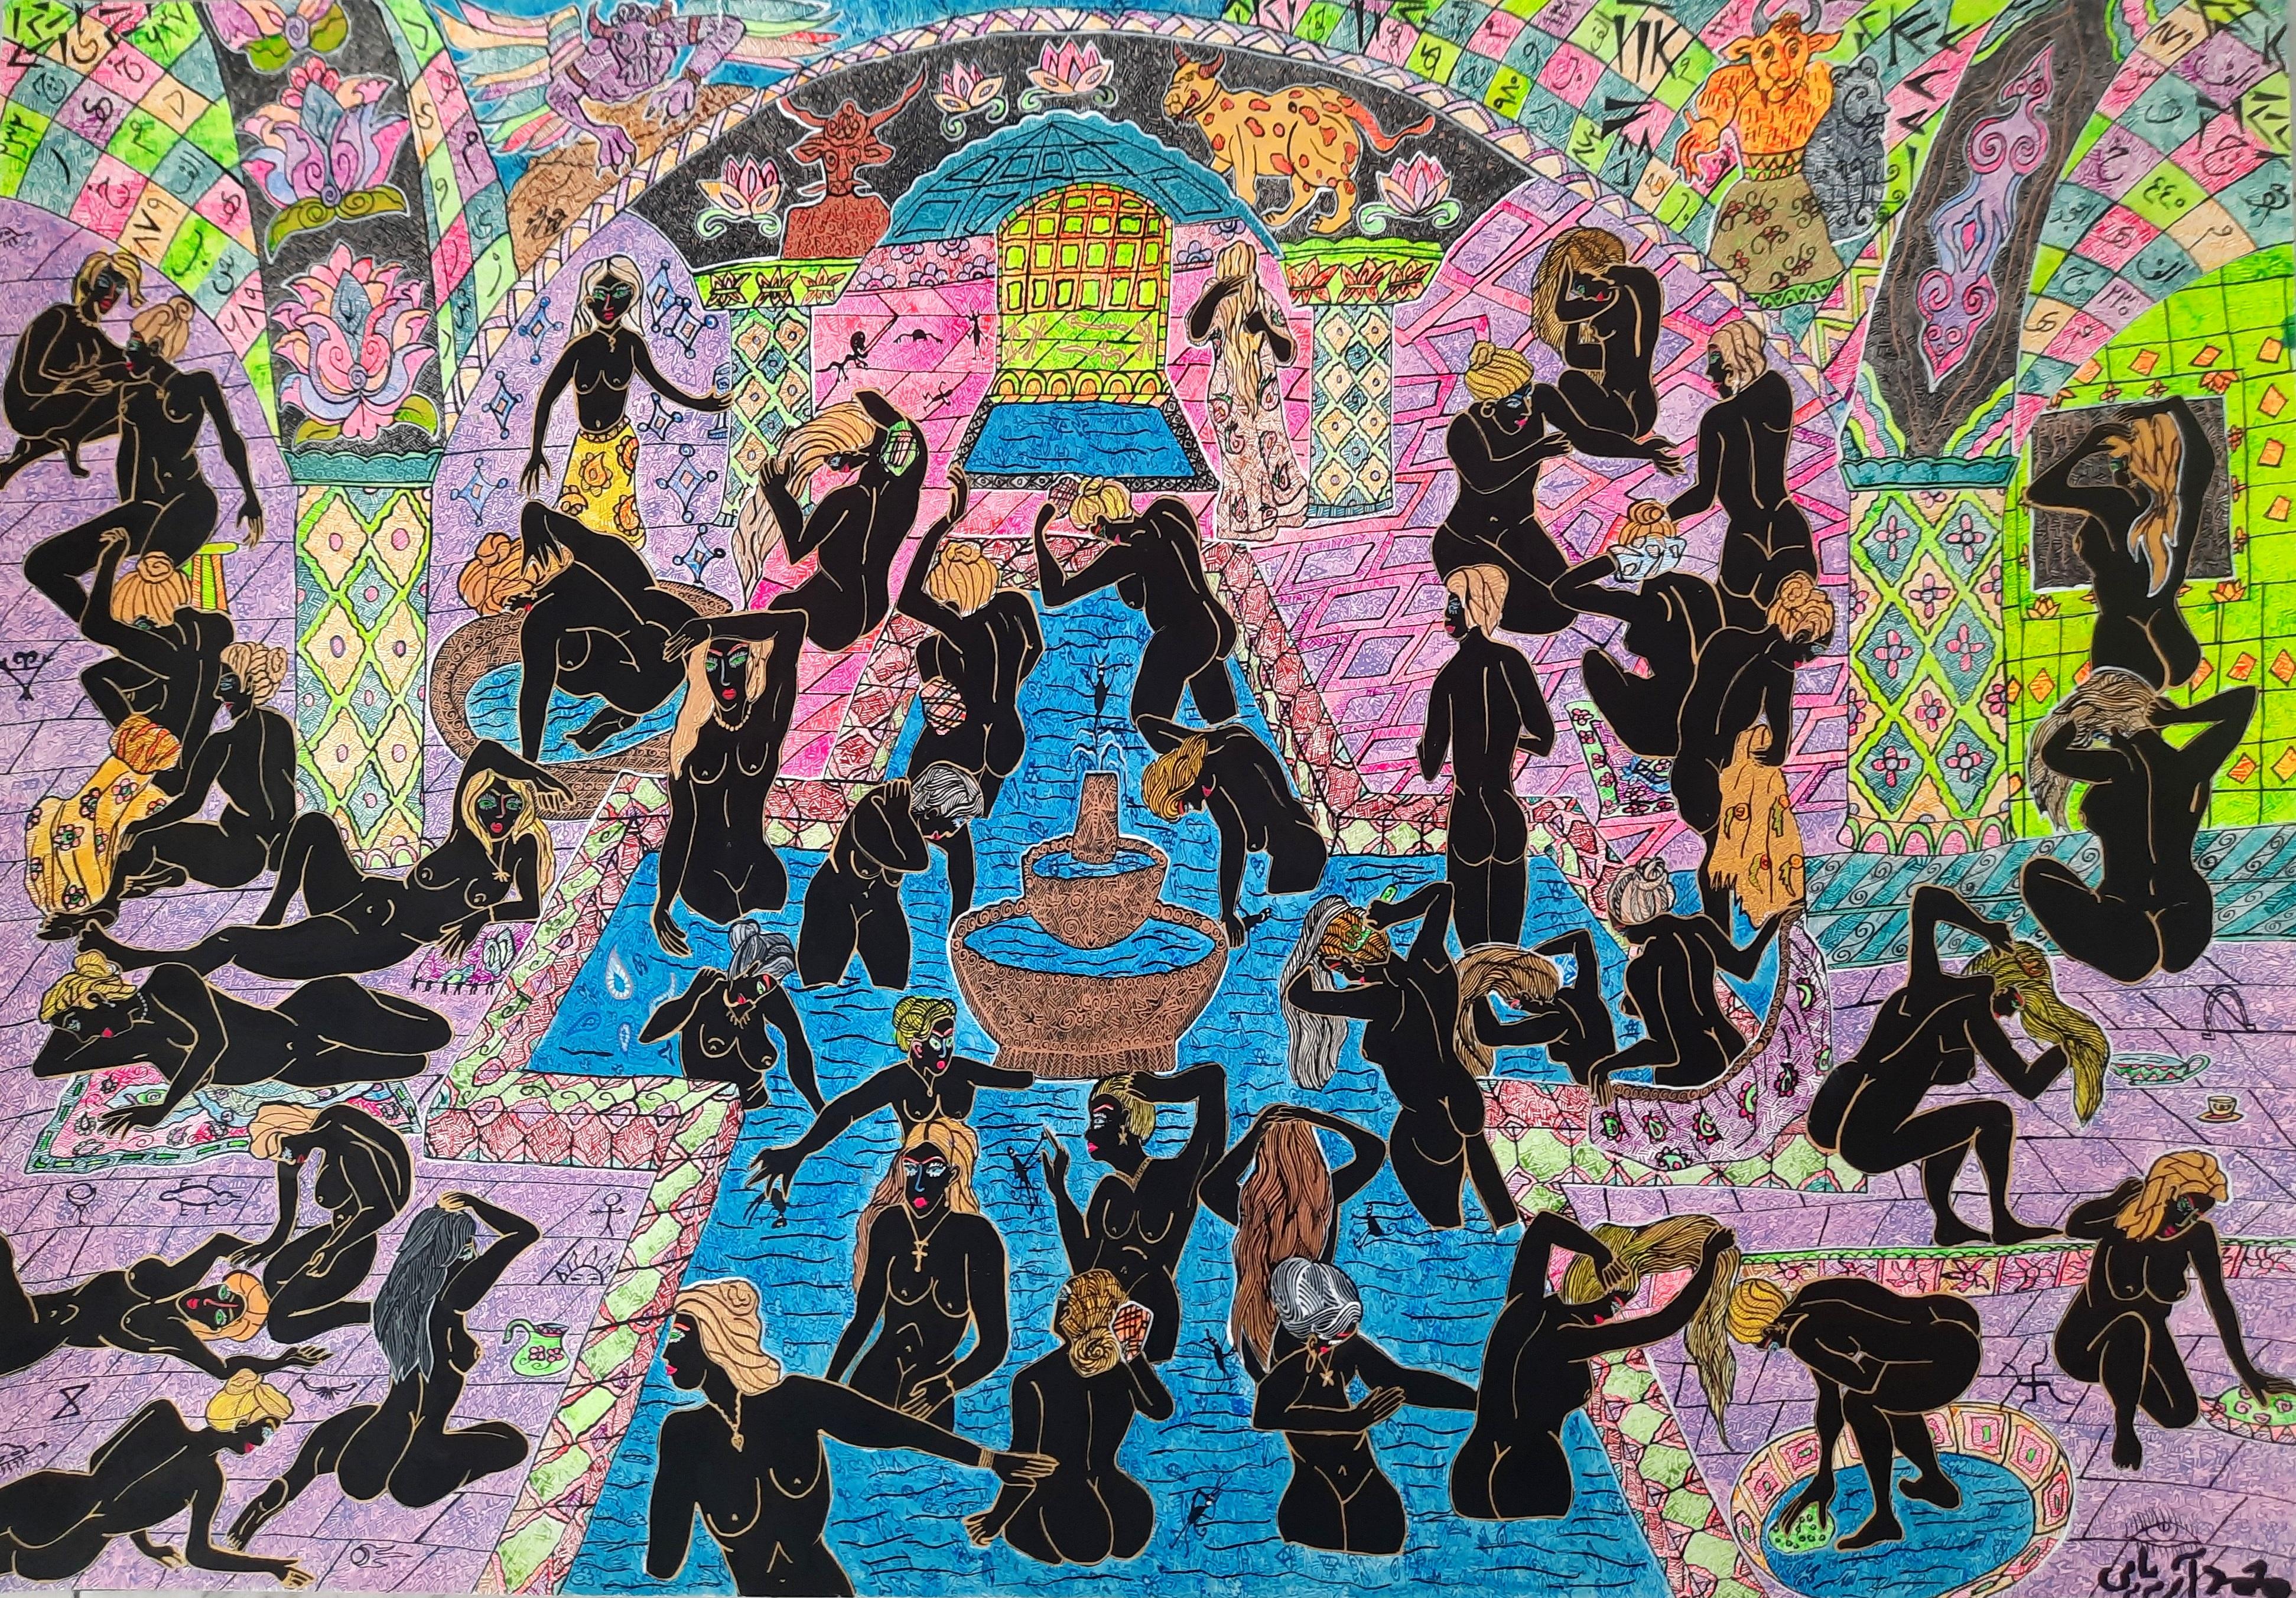 Acrylic painting on paper
Unique work 
Hand-signed by the artist lower right

THE THOUSAND AND ONE NIGHTS OF MOHAMMAD ARIYAEI

" Gentleness and oriental wisdom follow the supercharged bubbling to which we were accustomed from the previous